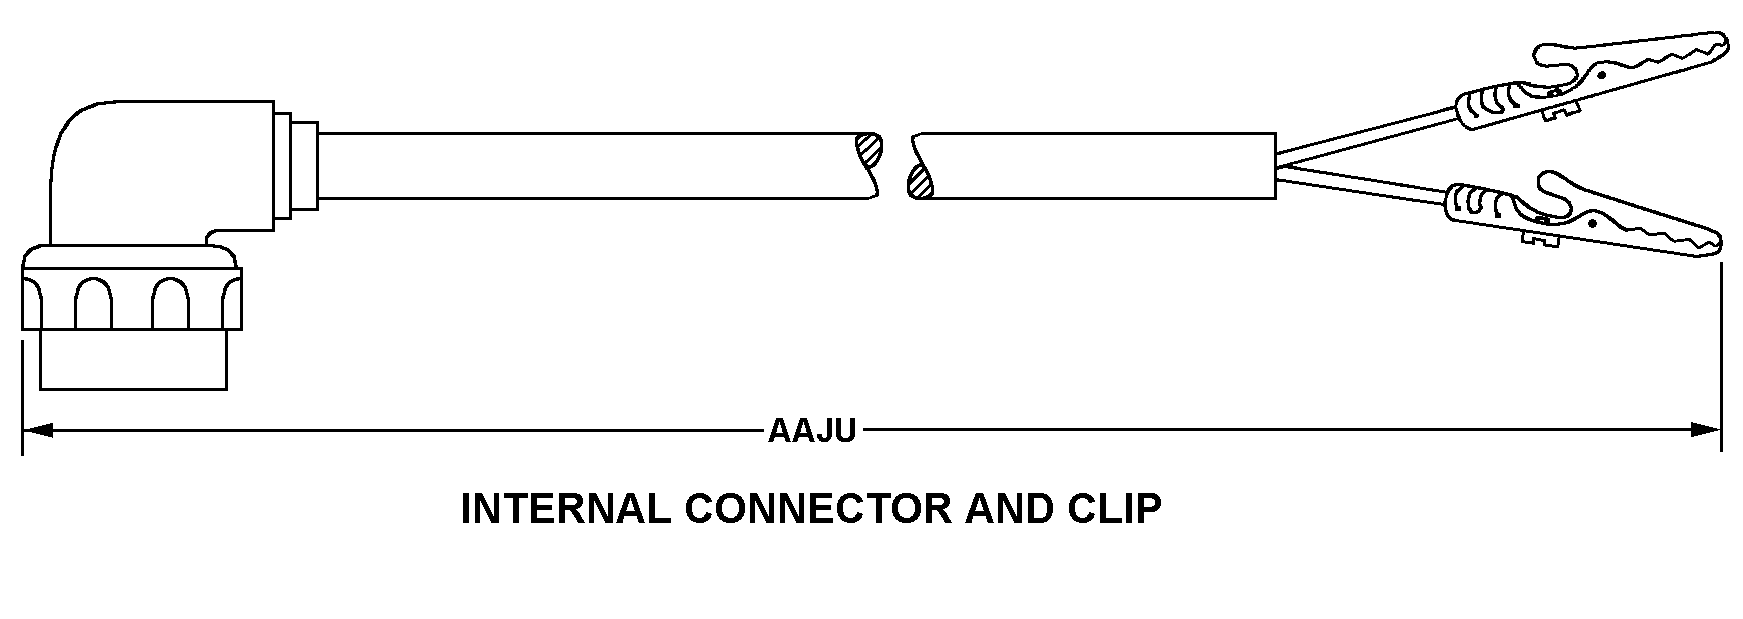 INTERNAL CONNECTOR AND CLIP style nsn 6150-01-082-3375